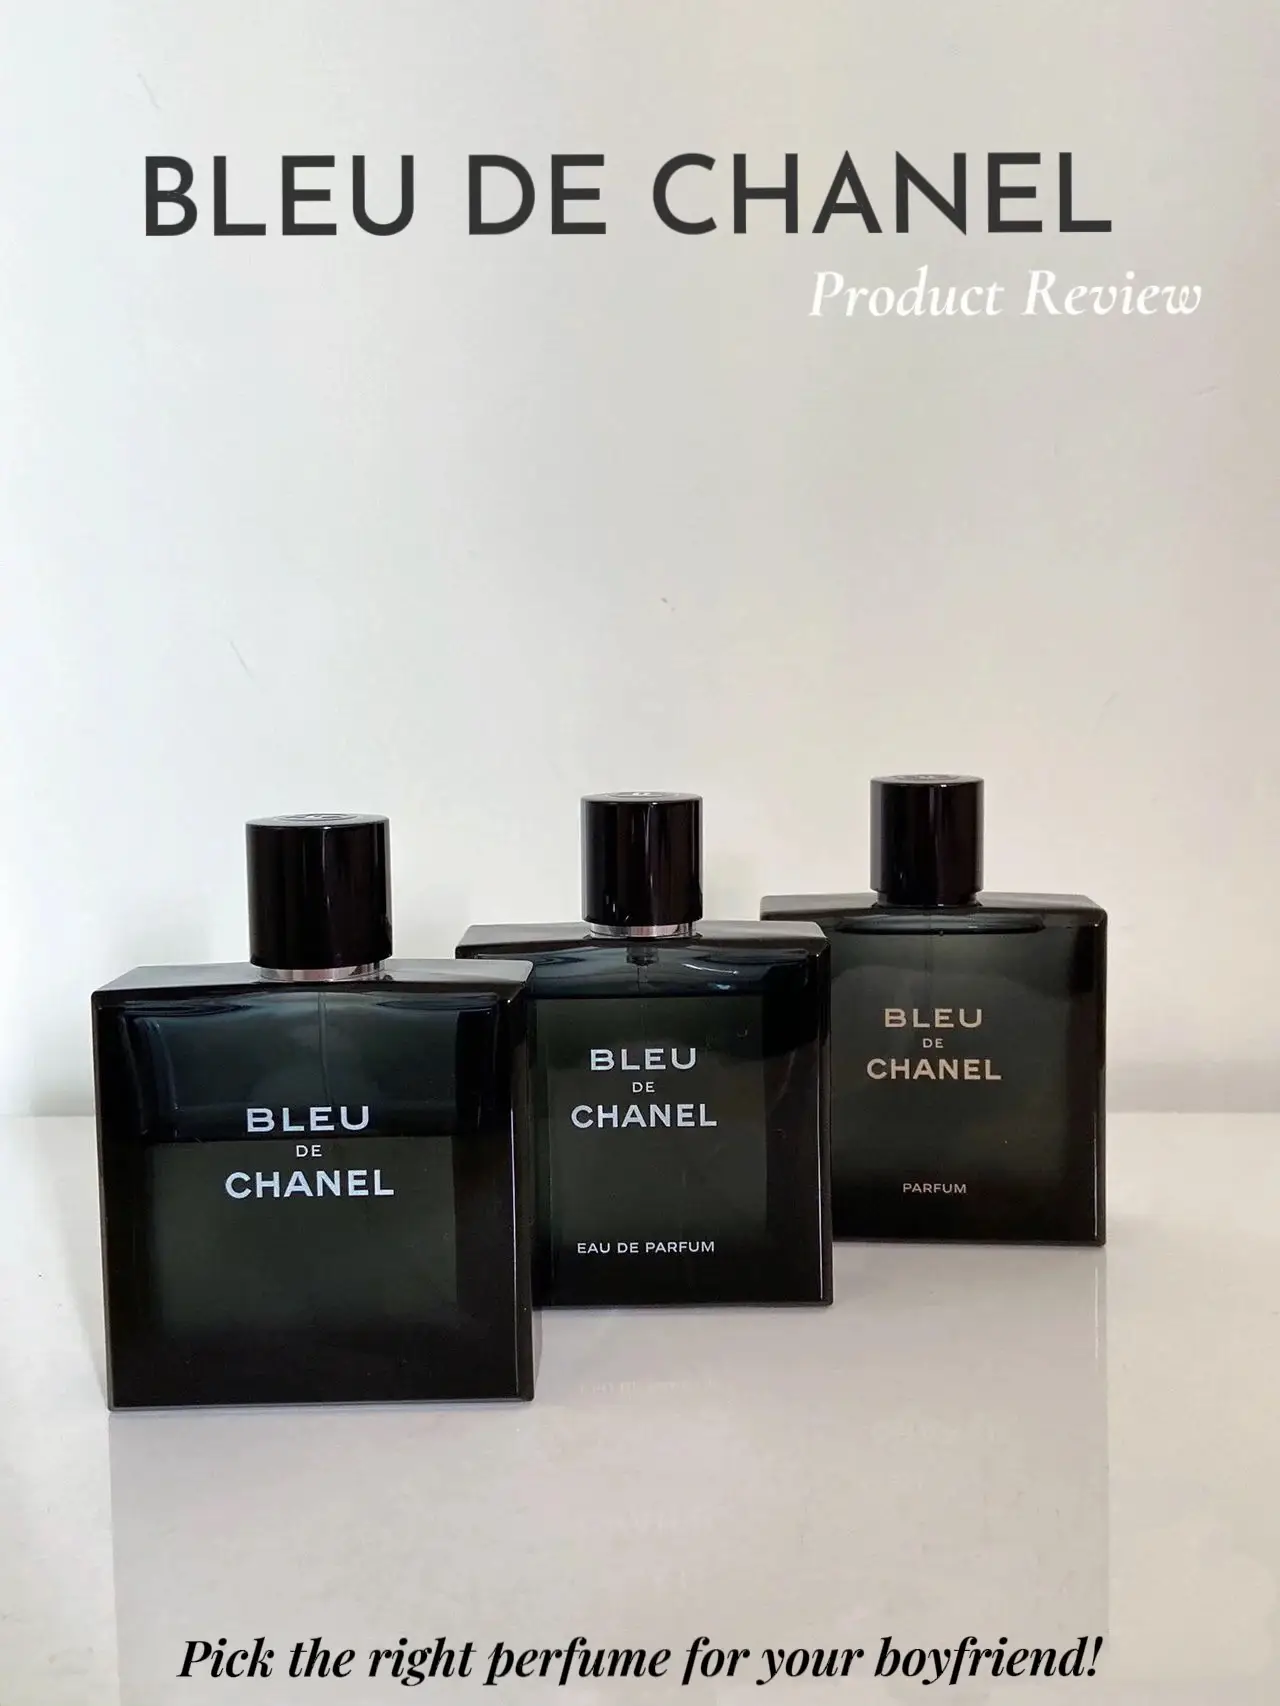 BLEU DE CHANEL PERFUME - Product Review, Gallery posted by Ashy Patterson